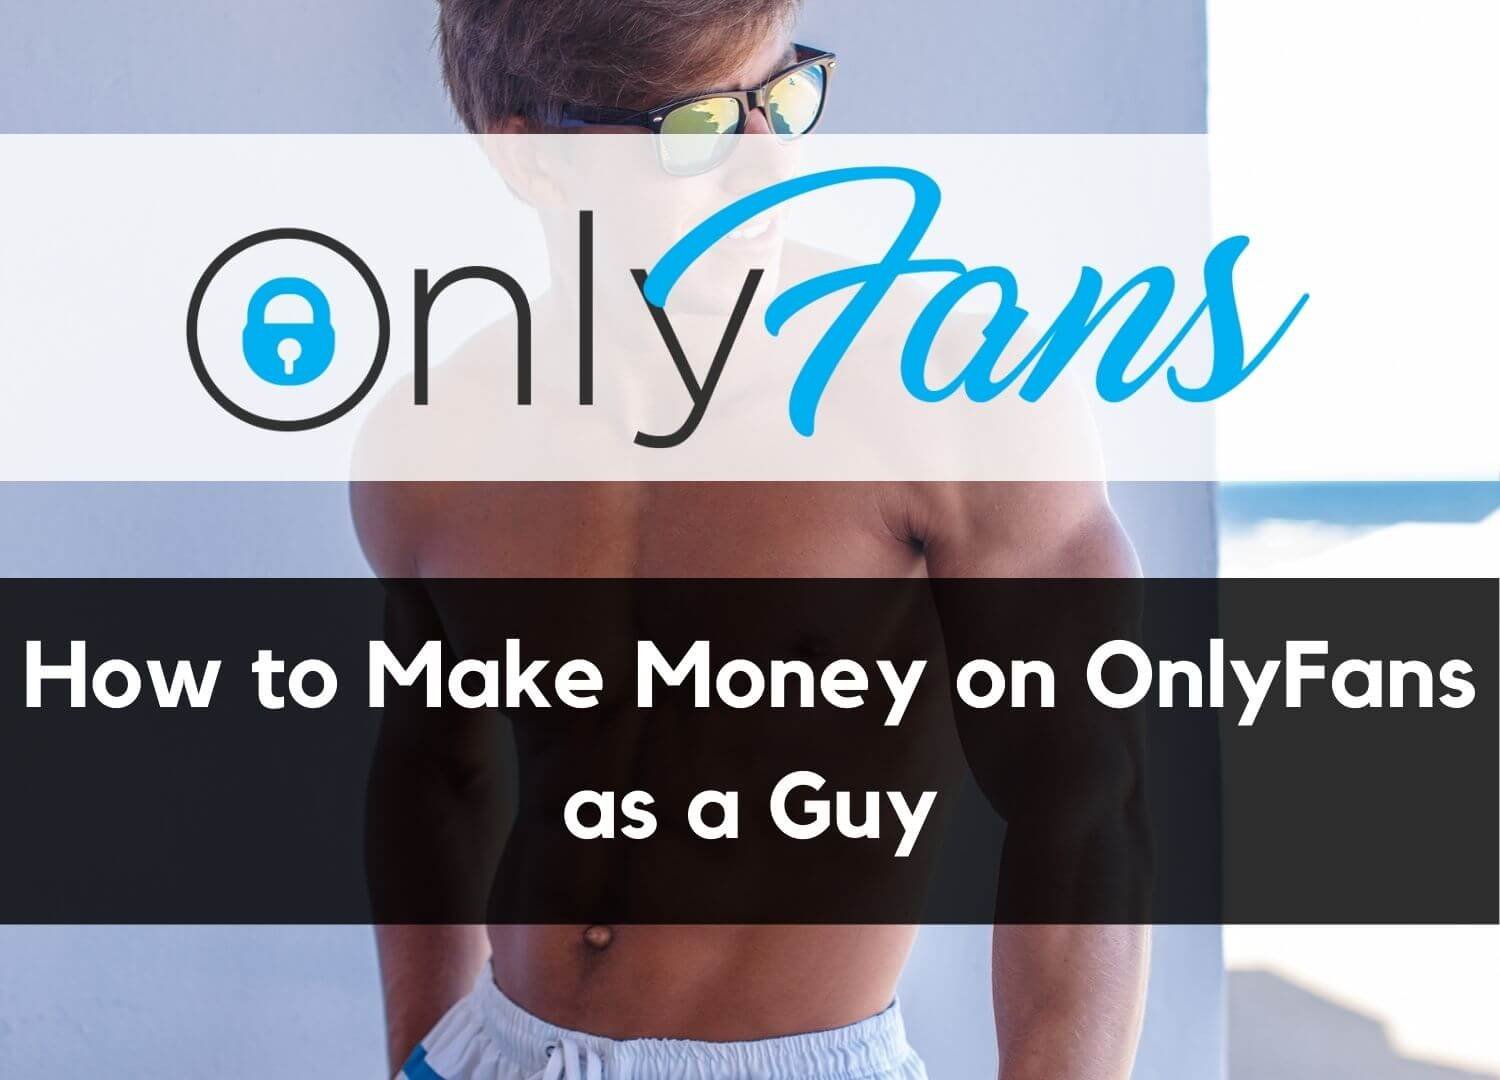 Can guys make a onlyfans